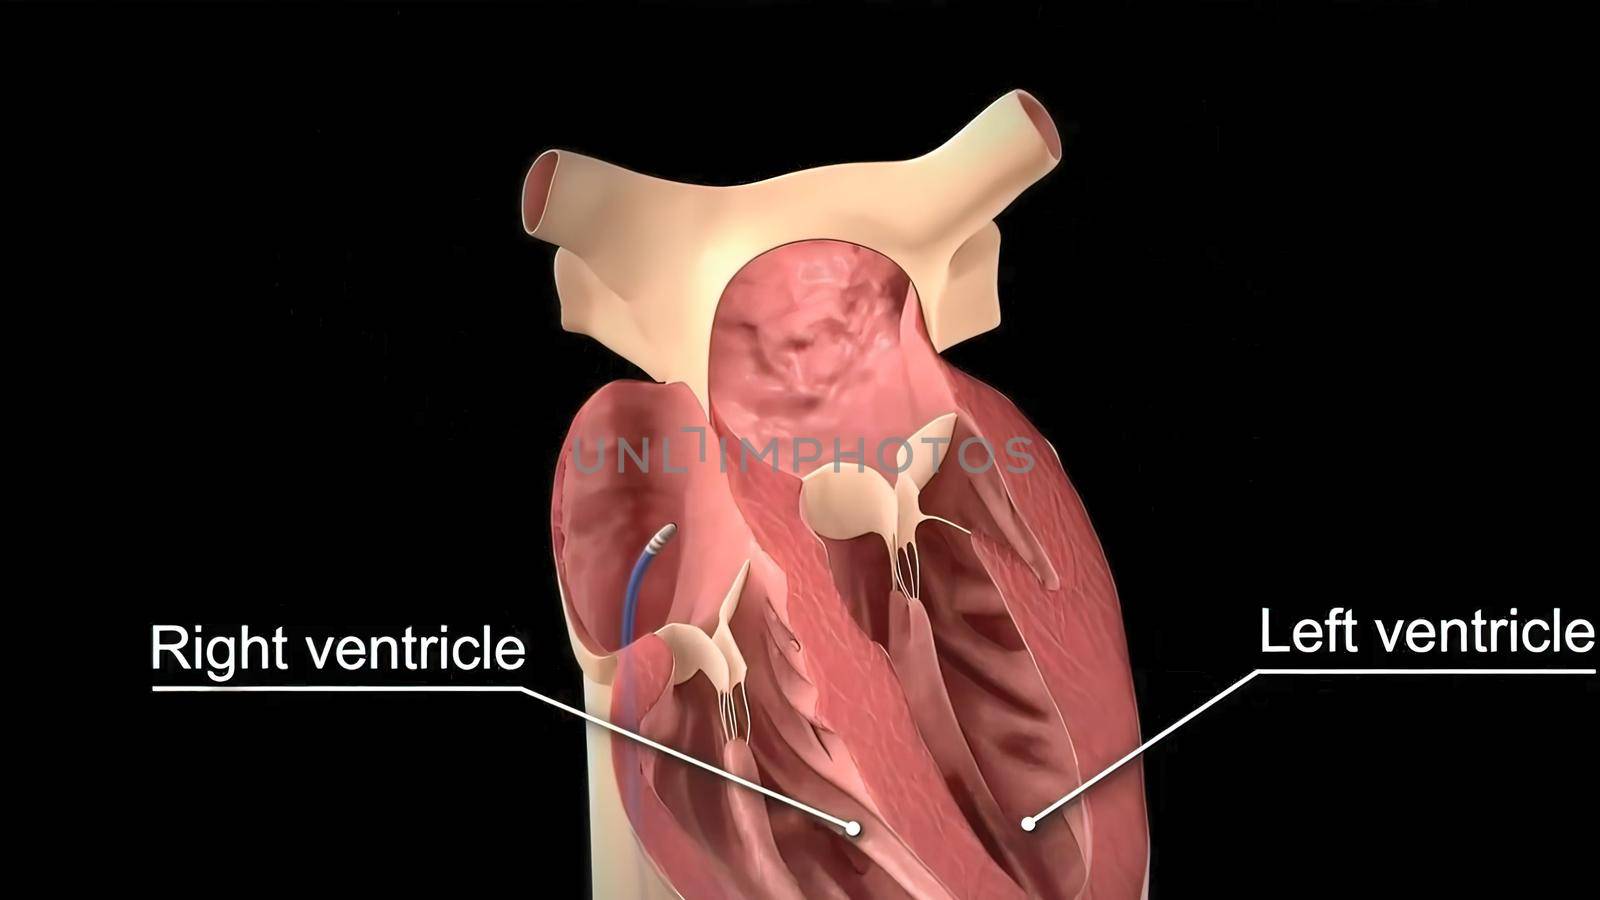 Catheter ablation 3D Medical illustration by creativepic